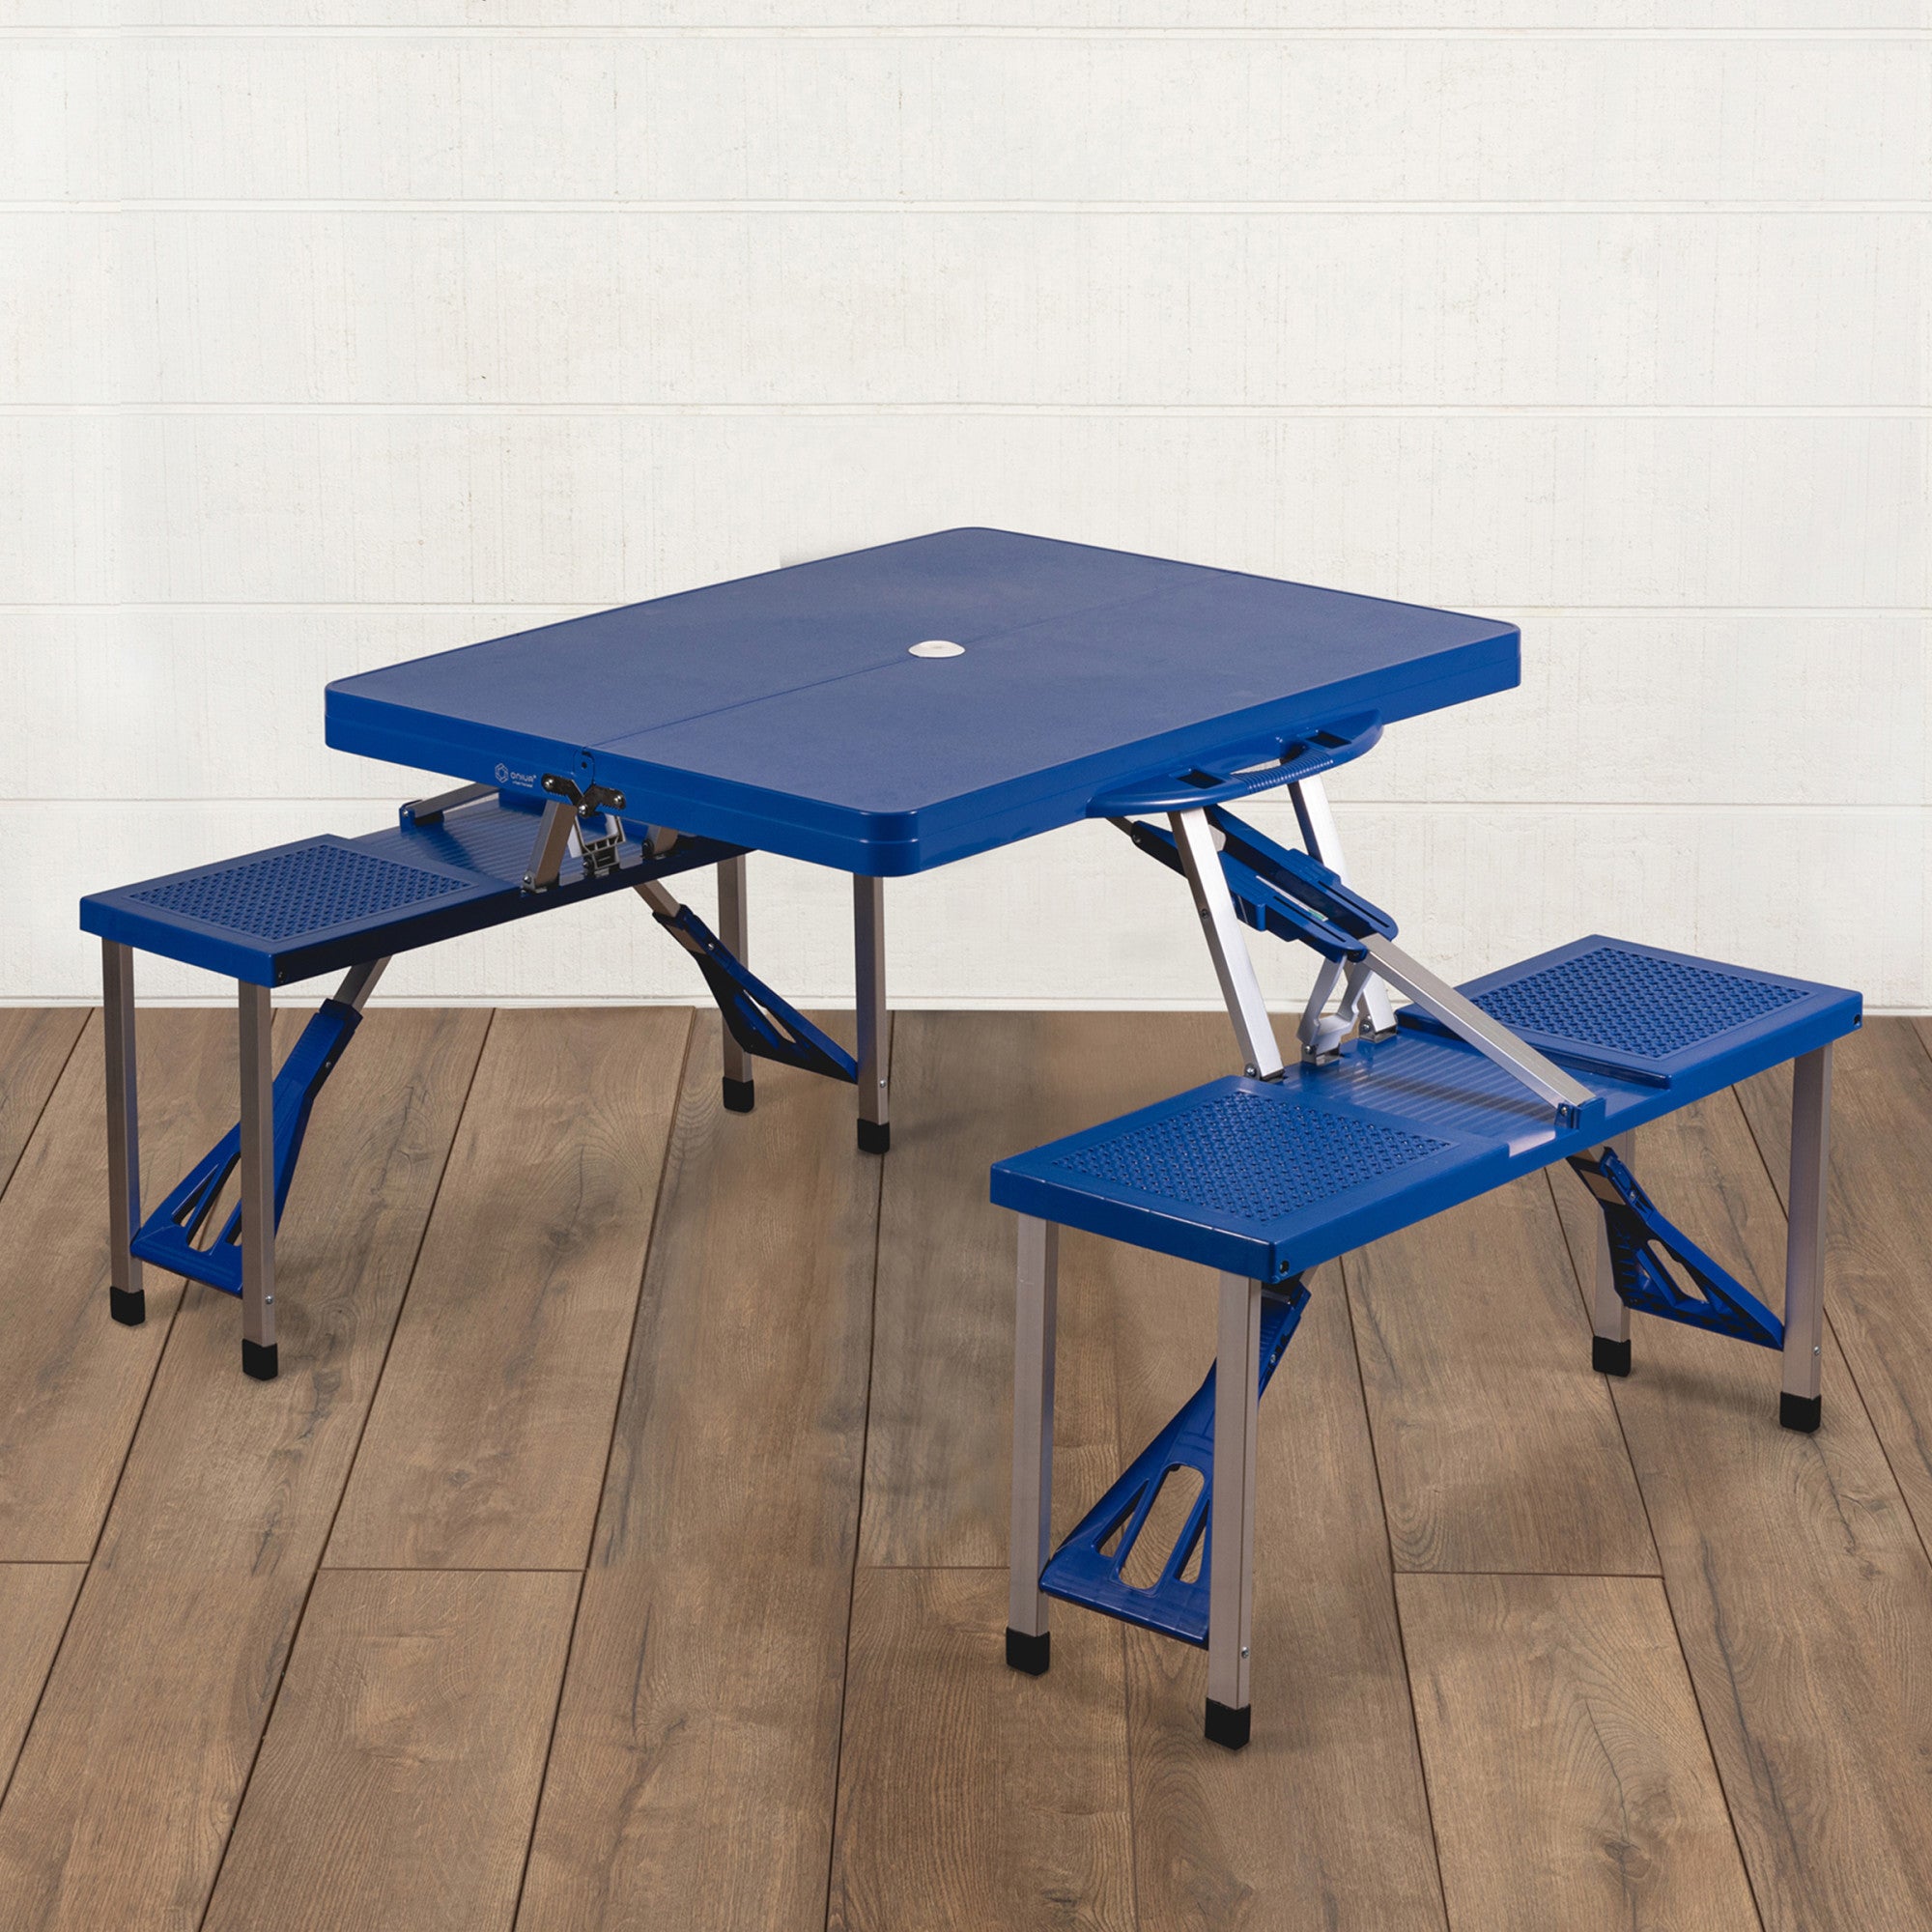 Portable Folding Picnic Table with Seats - Compact & Durable